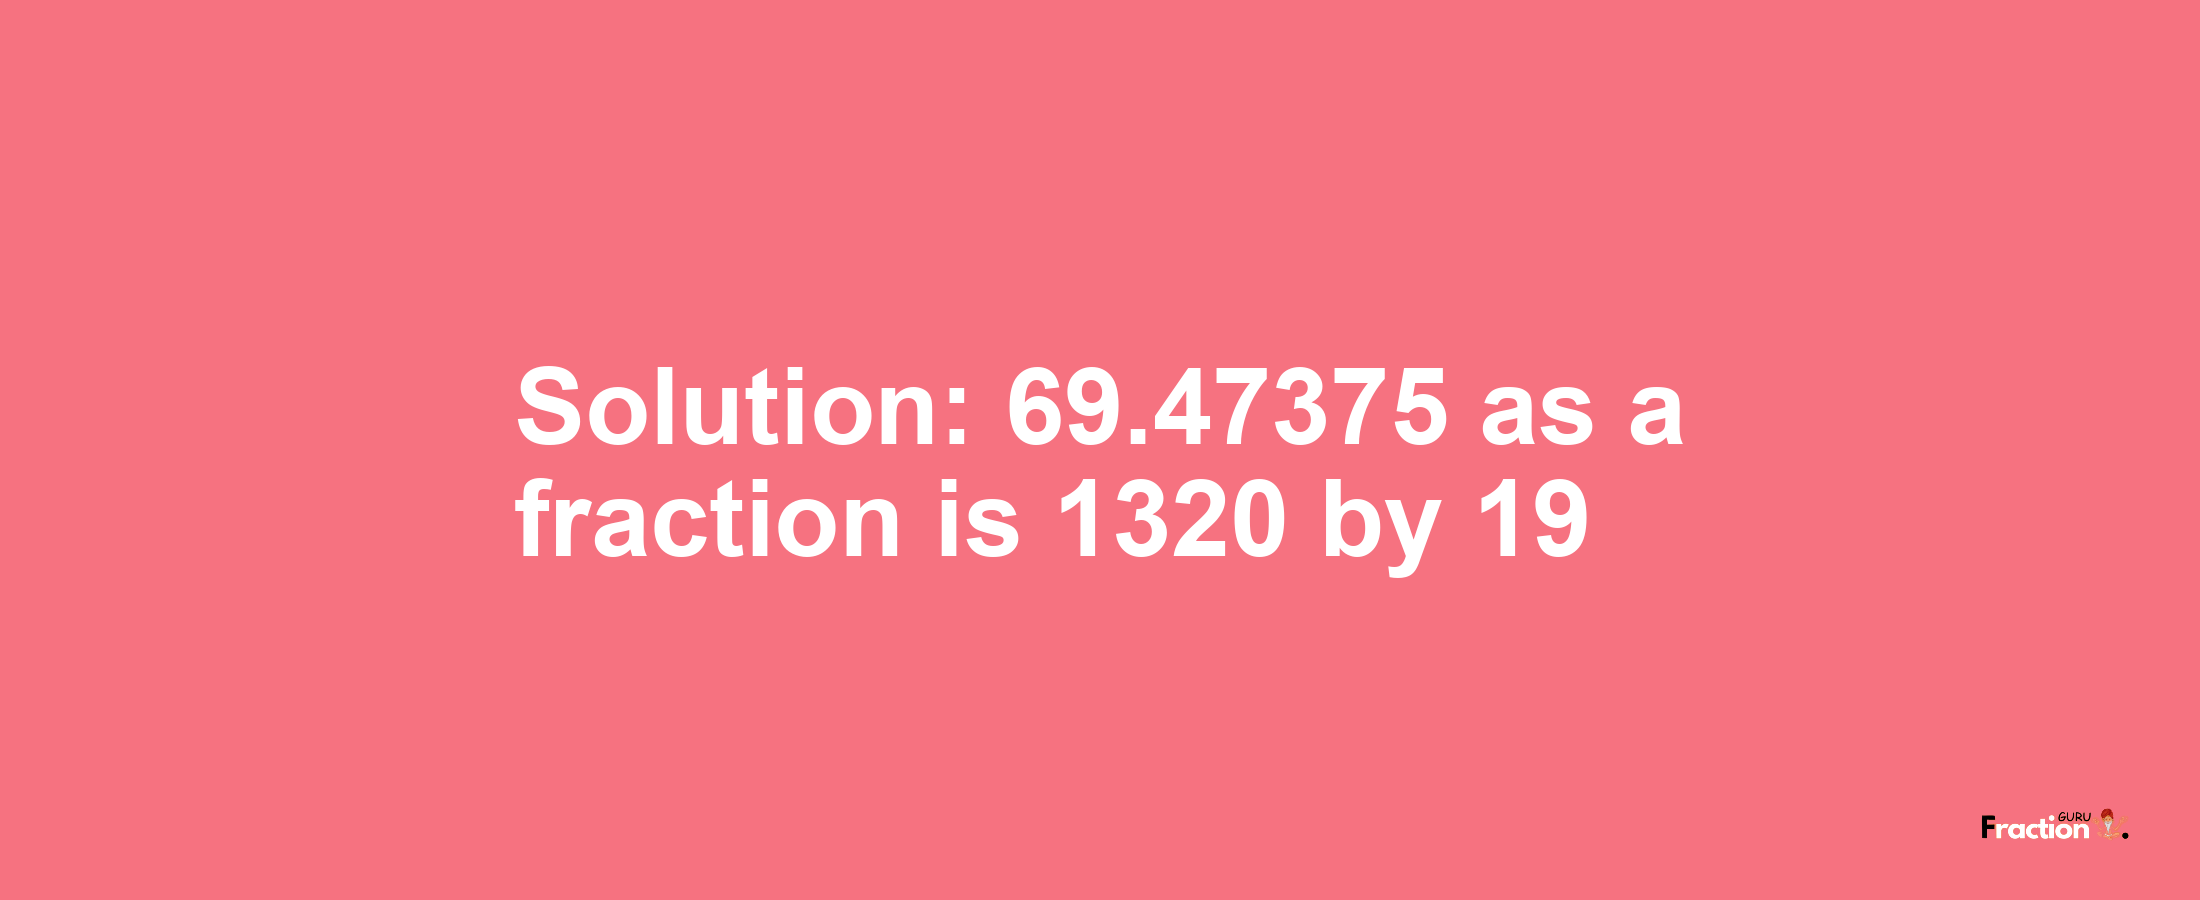 Solution:69.47375 as a fraction is 1320/19